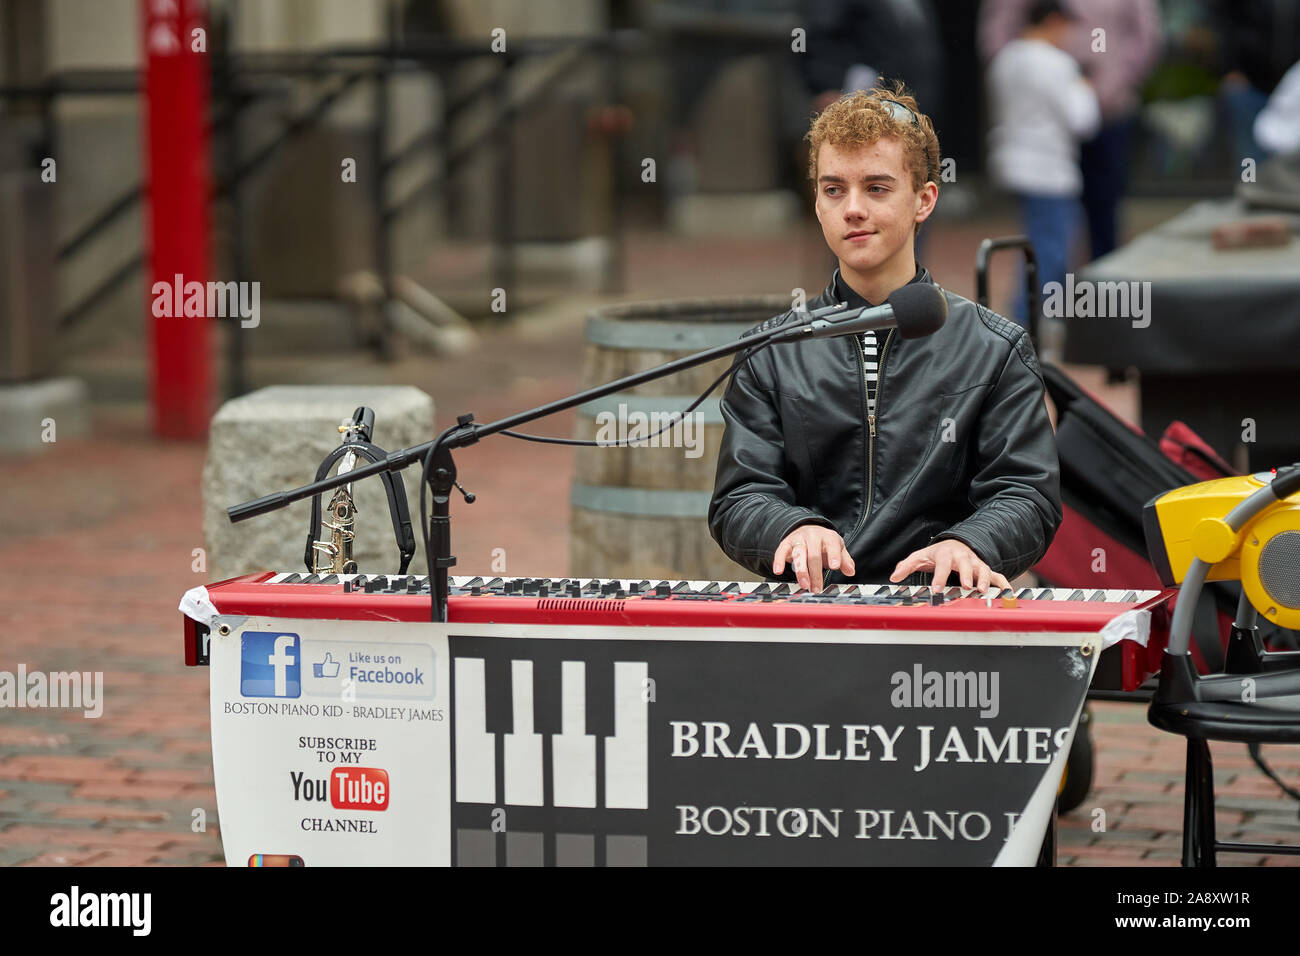 Boston, Mass / USA - 4/14/2017: Bradley James, musical street performer in the Faneuil Hall area. Stock Photo